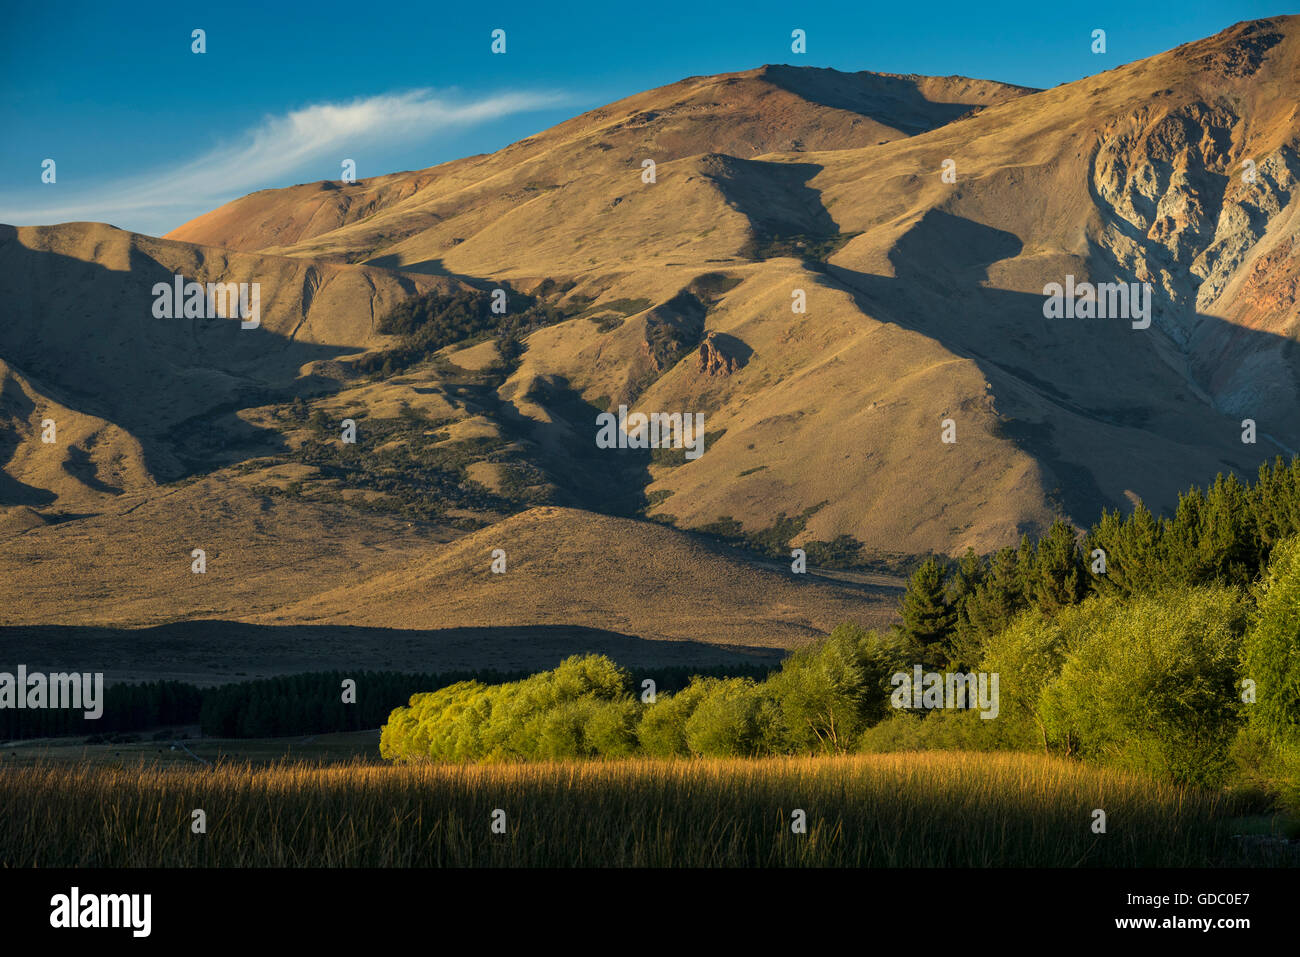 South America,Argentina,Patagonia,Chubut,Esquel,Andes mountains Stock Photo